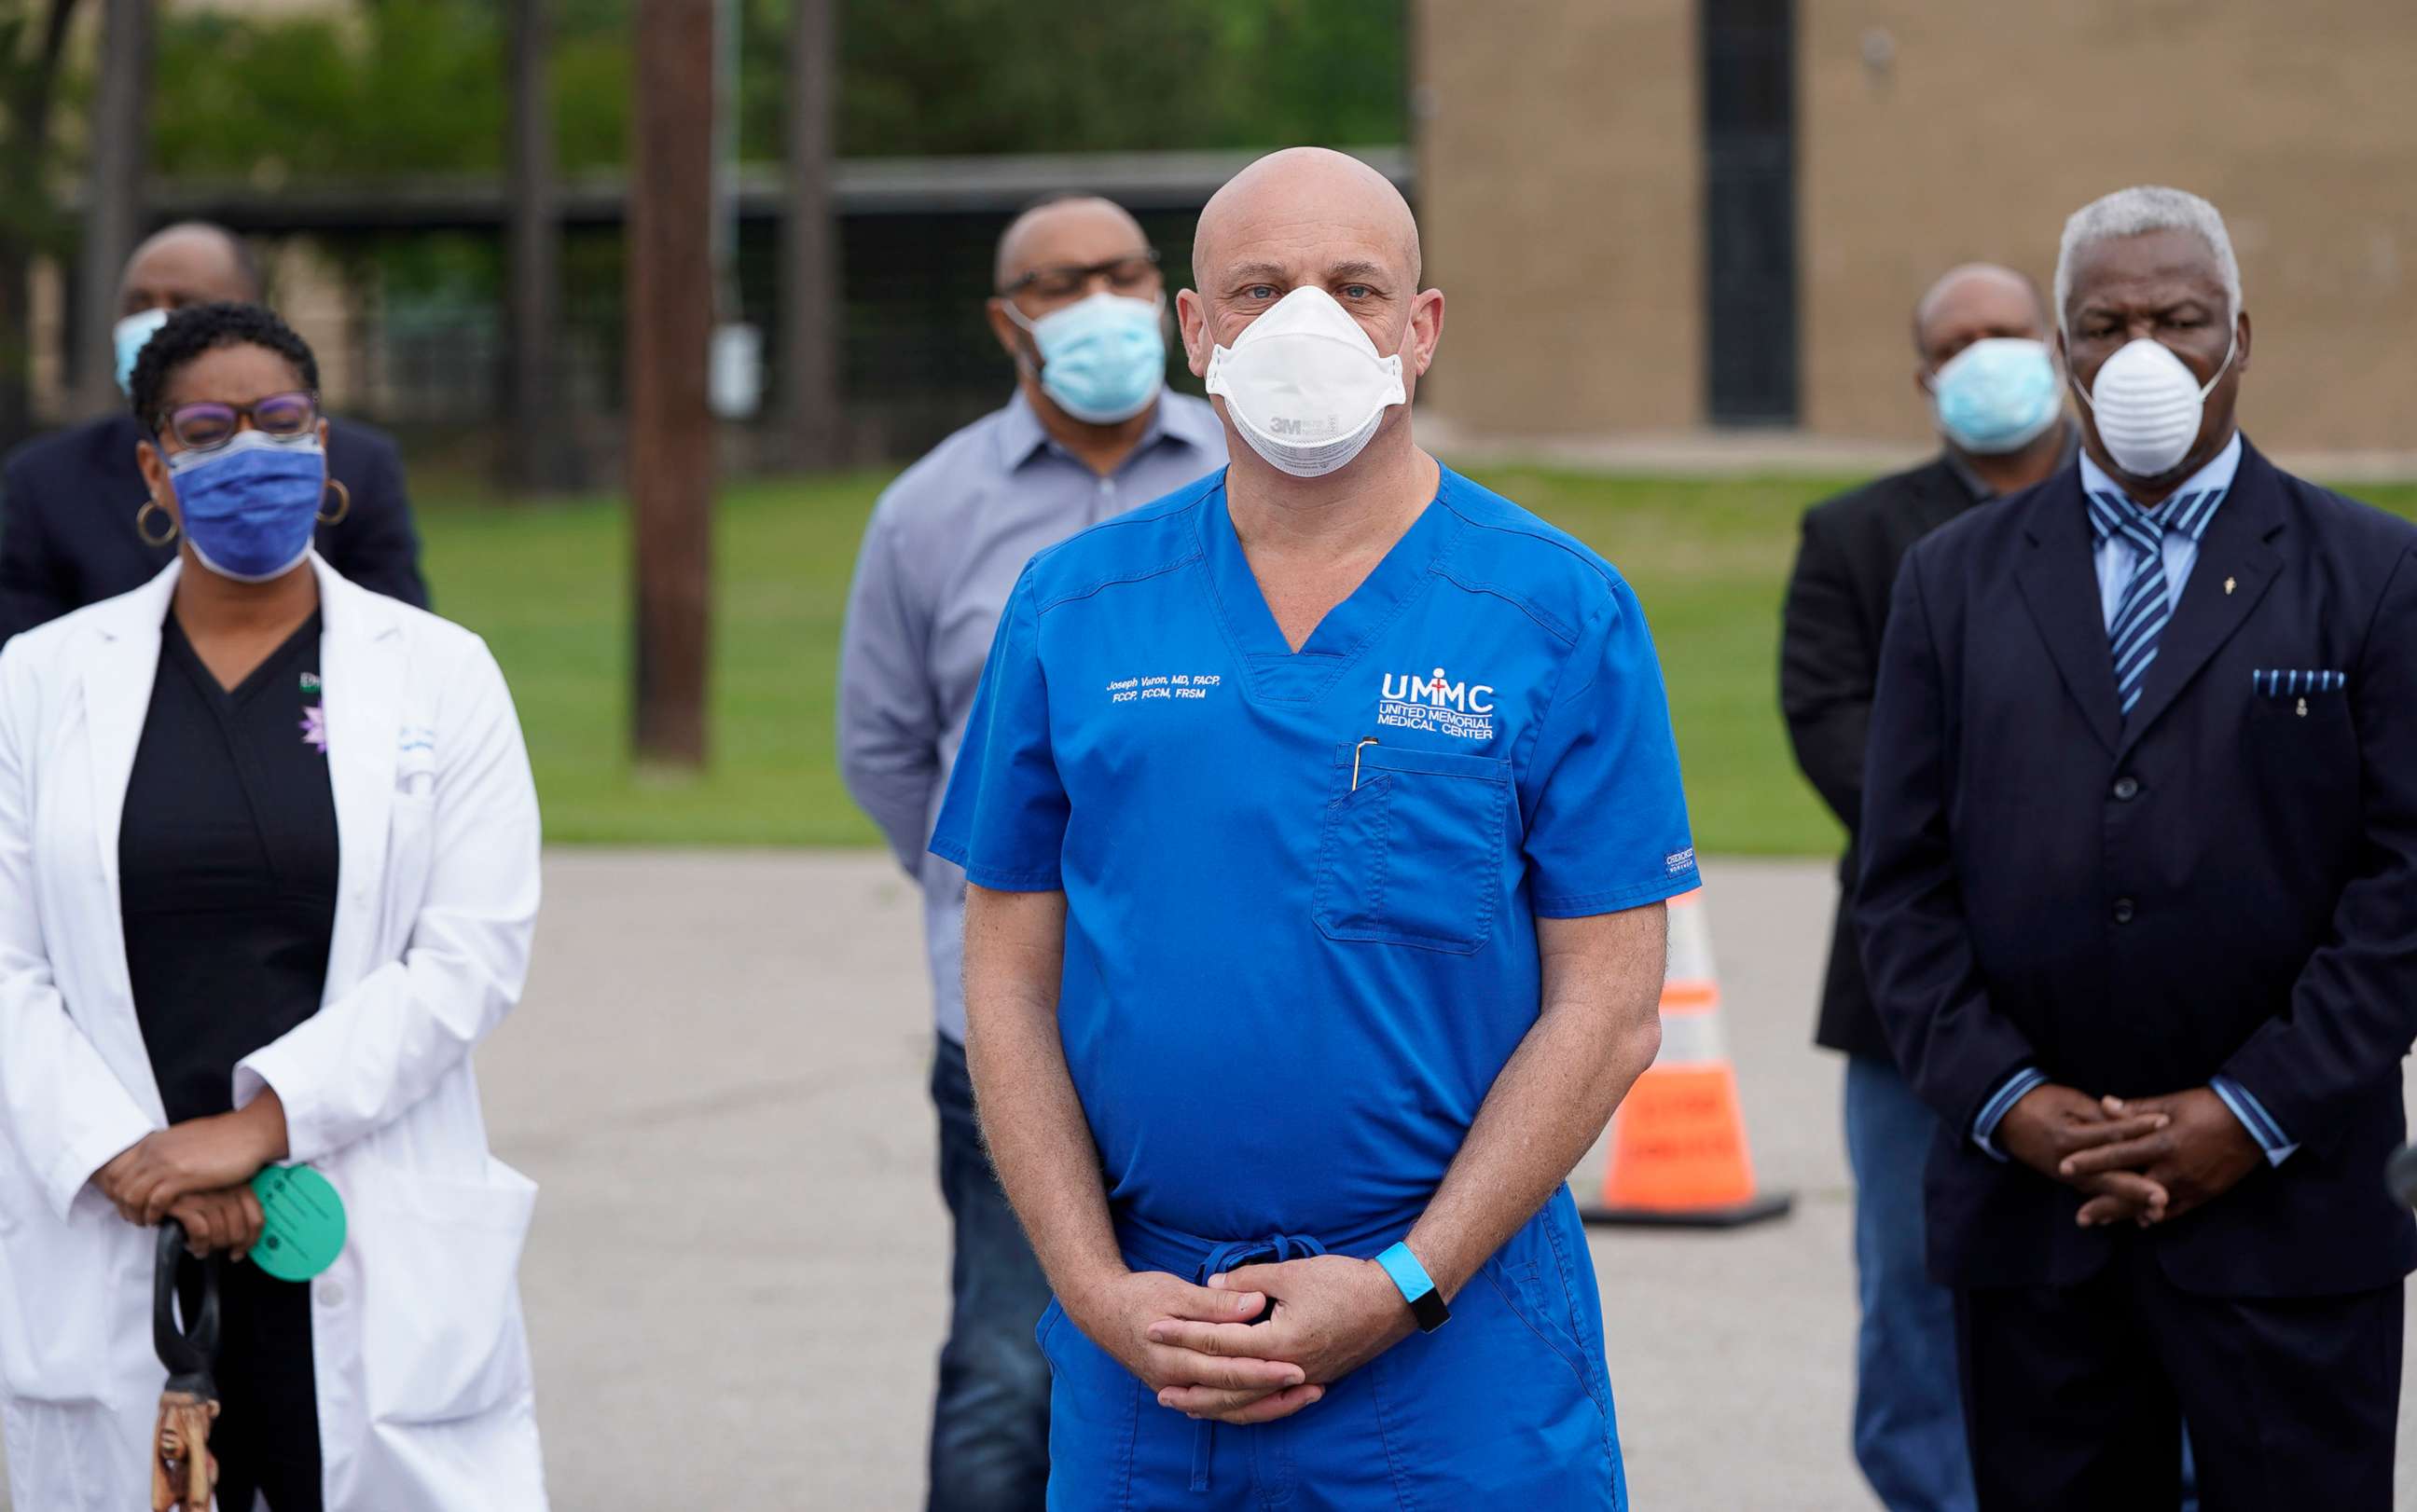 PHOTO: United Memorial Medical Center's Dr. Joseph Varon, center, practices social distancing while waiting to speak during a news conference at their newly opened free drive through Covid-19 testing site, April 2, 2020, in Houston.